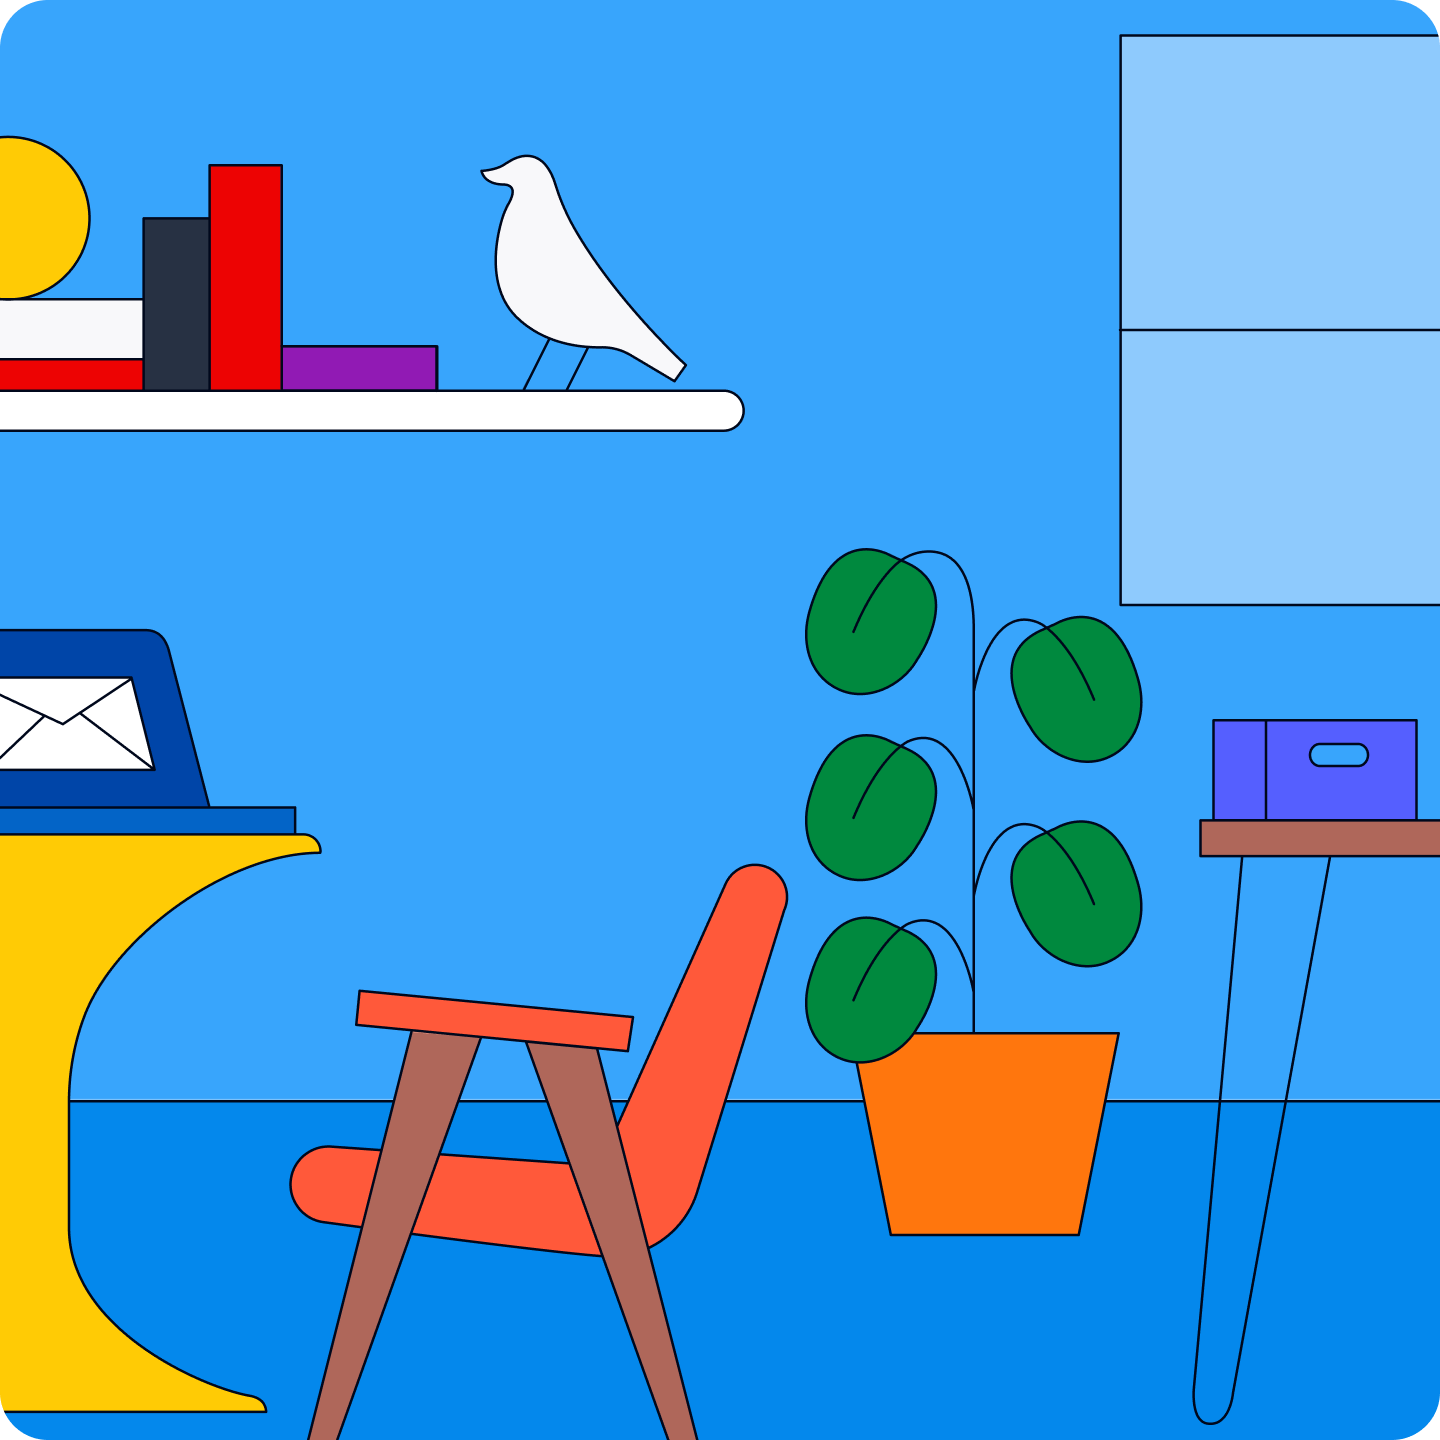 Illustration of a room containing an orange armchair with wooden legs, a floating wall shelf, a yellow table, and a potted plant